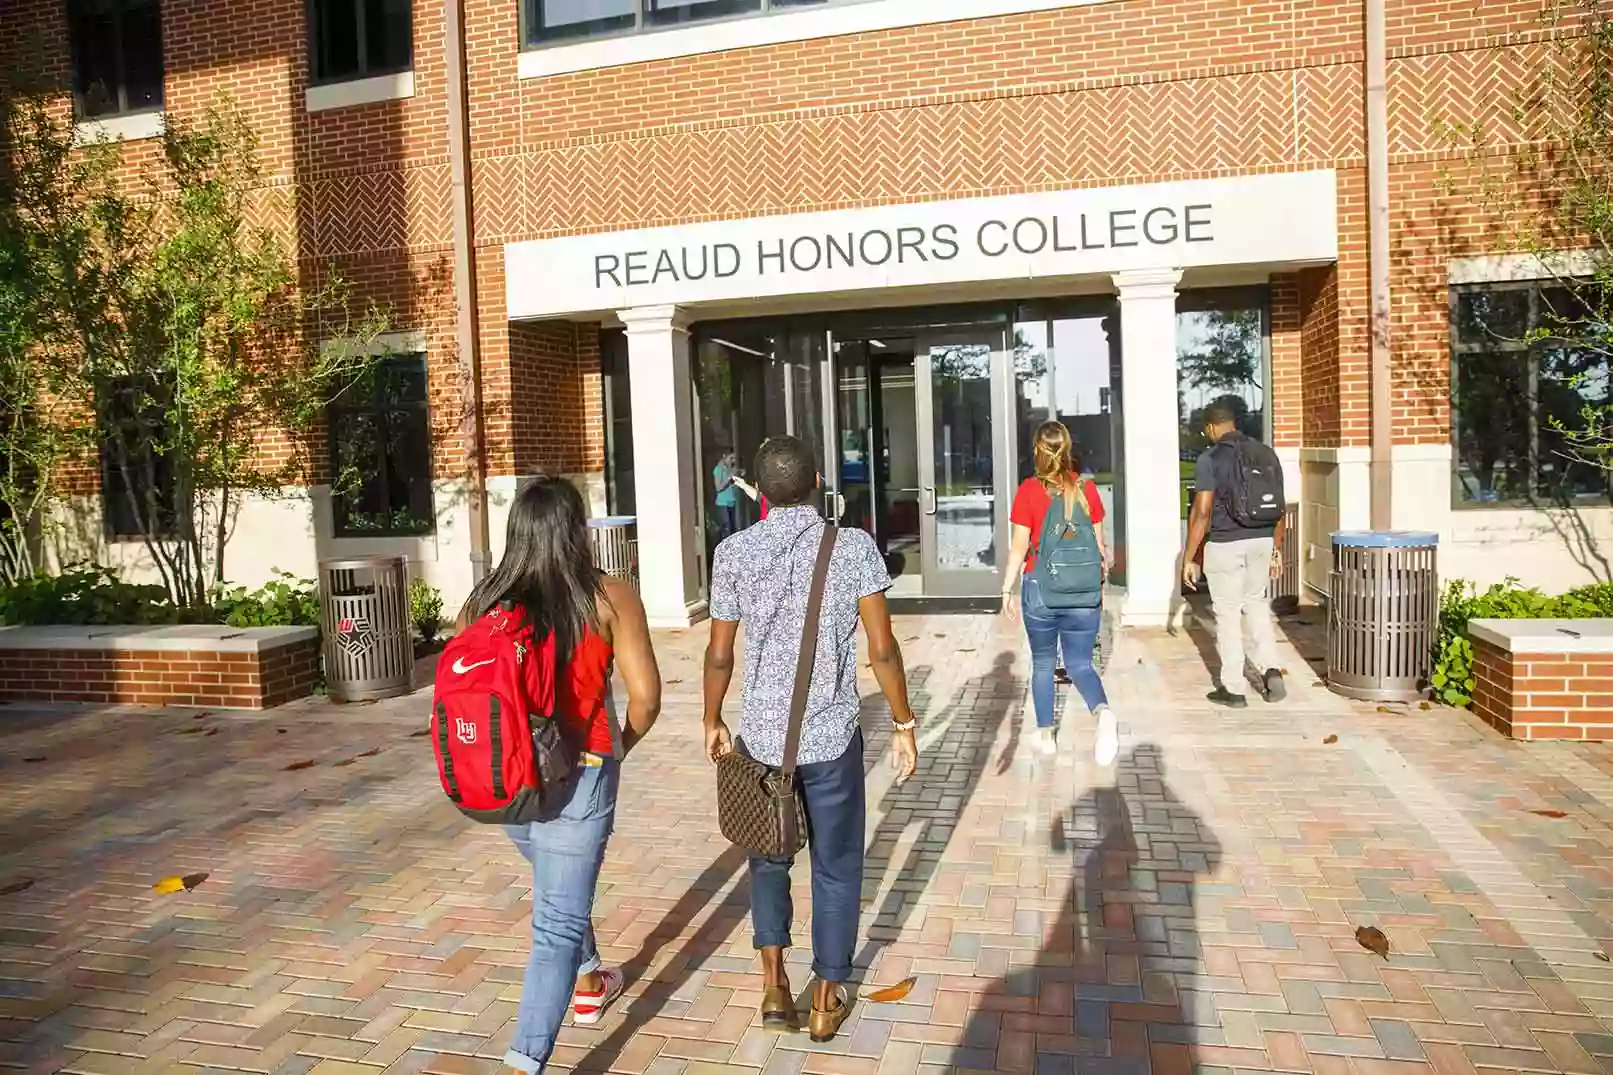 Reaud Honors College